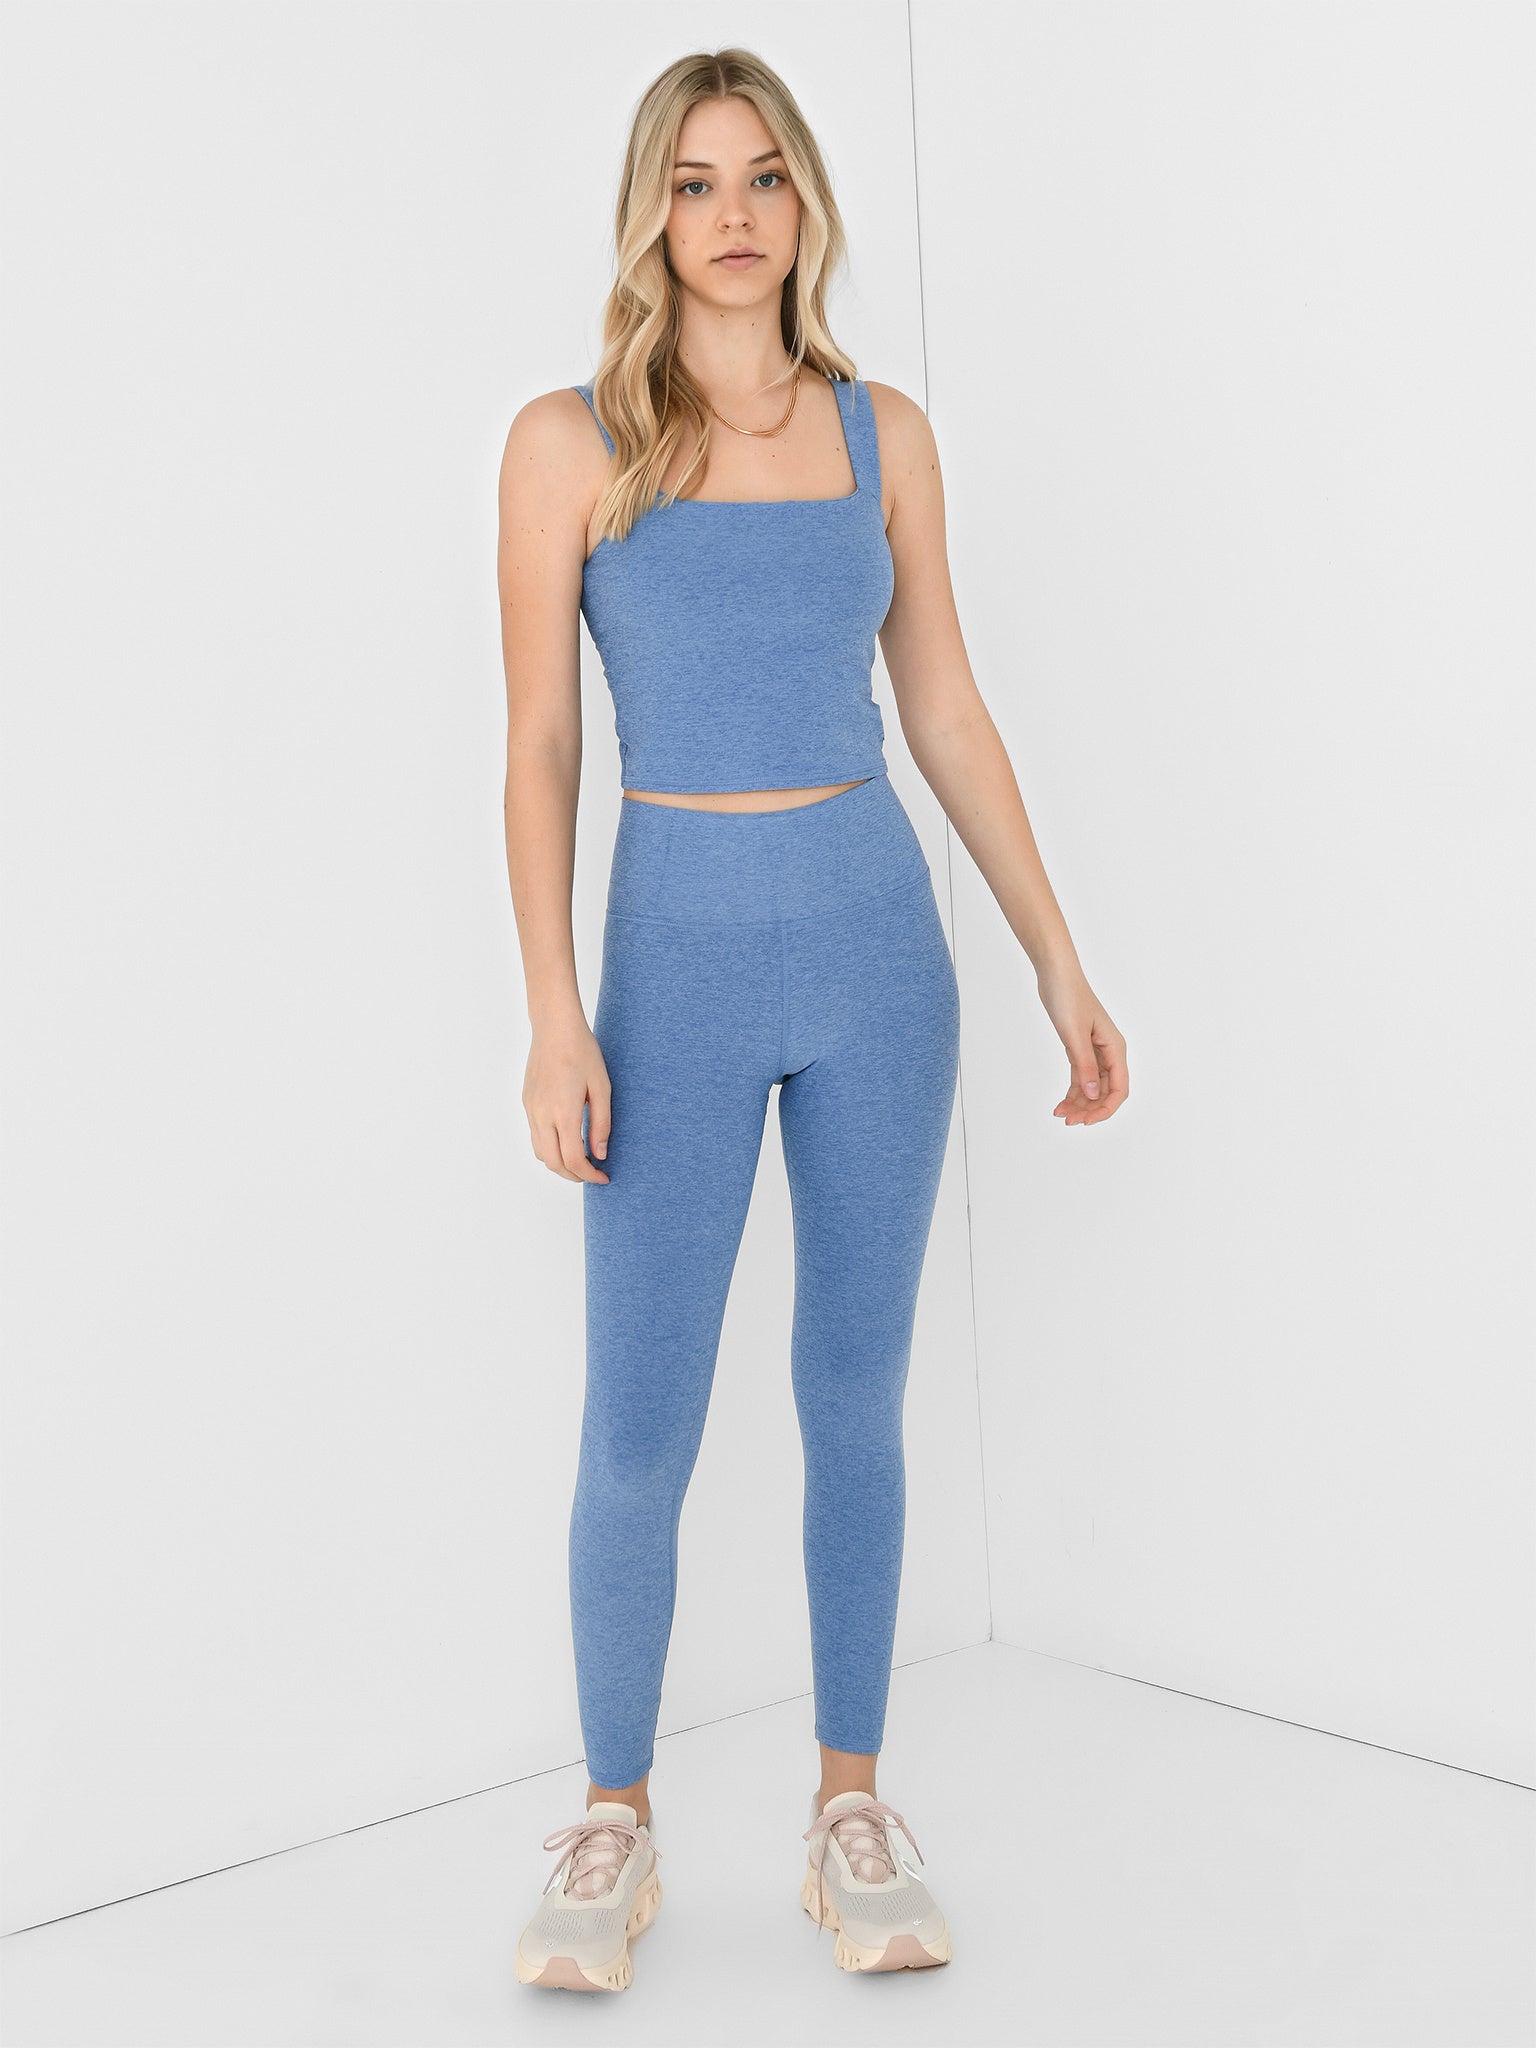 The North Face Elevation Crop Legging - Women's  Cropped leggings, Women's  leggings, The north face